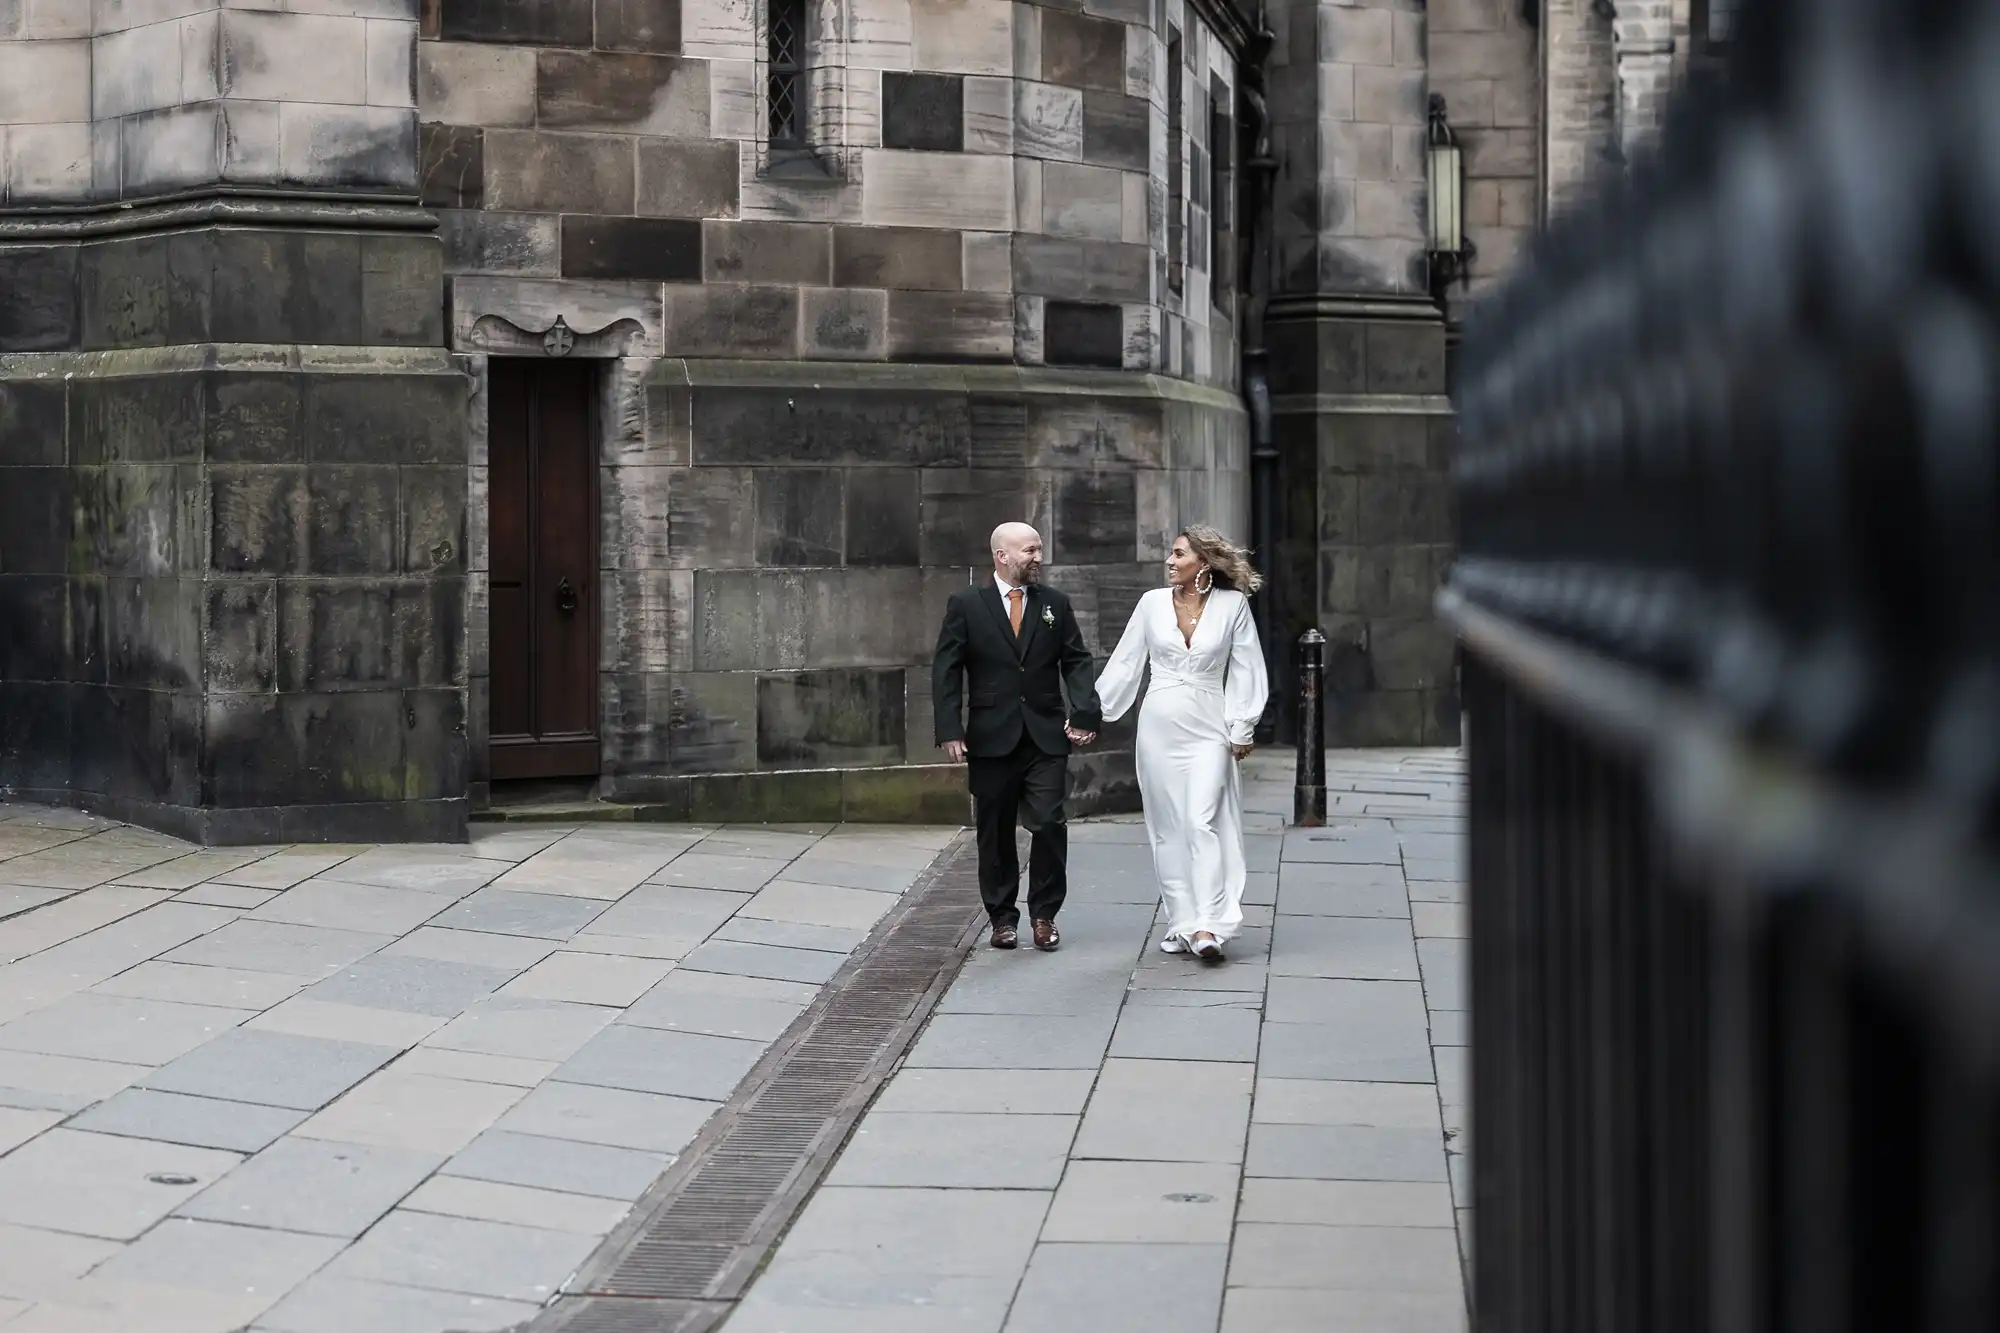 A man in a dark suit and a woman in a white outfit walk hand in hand on a cobblestone street near a stone building.